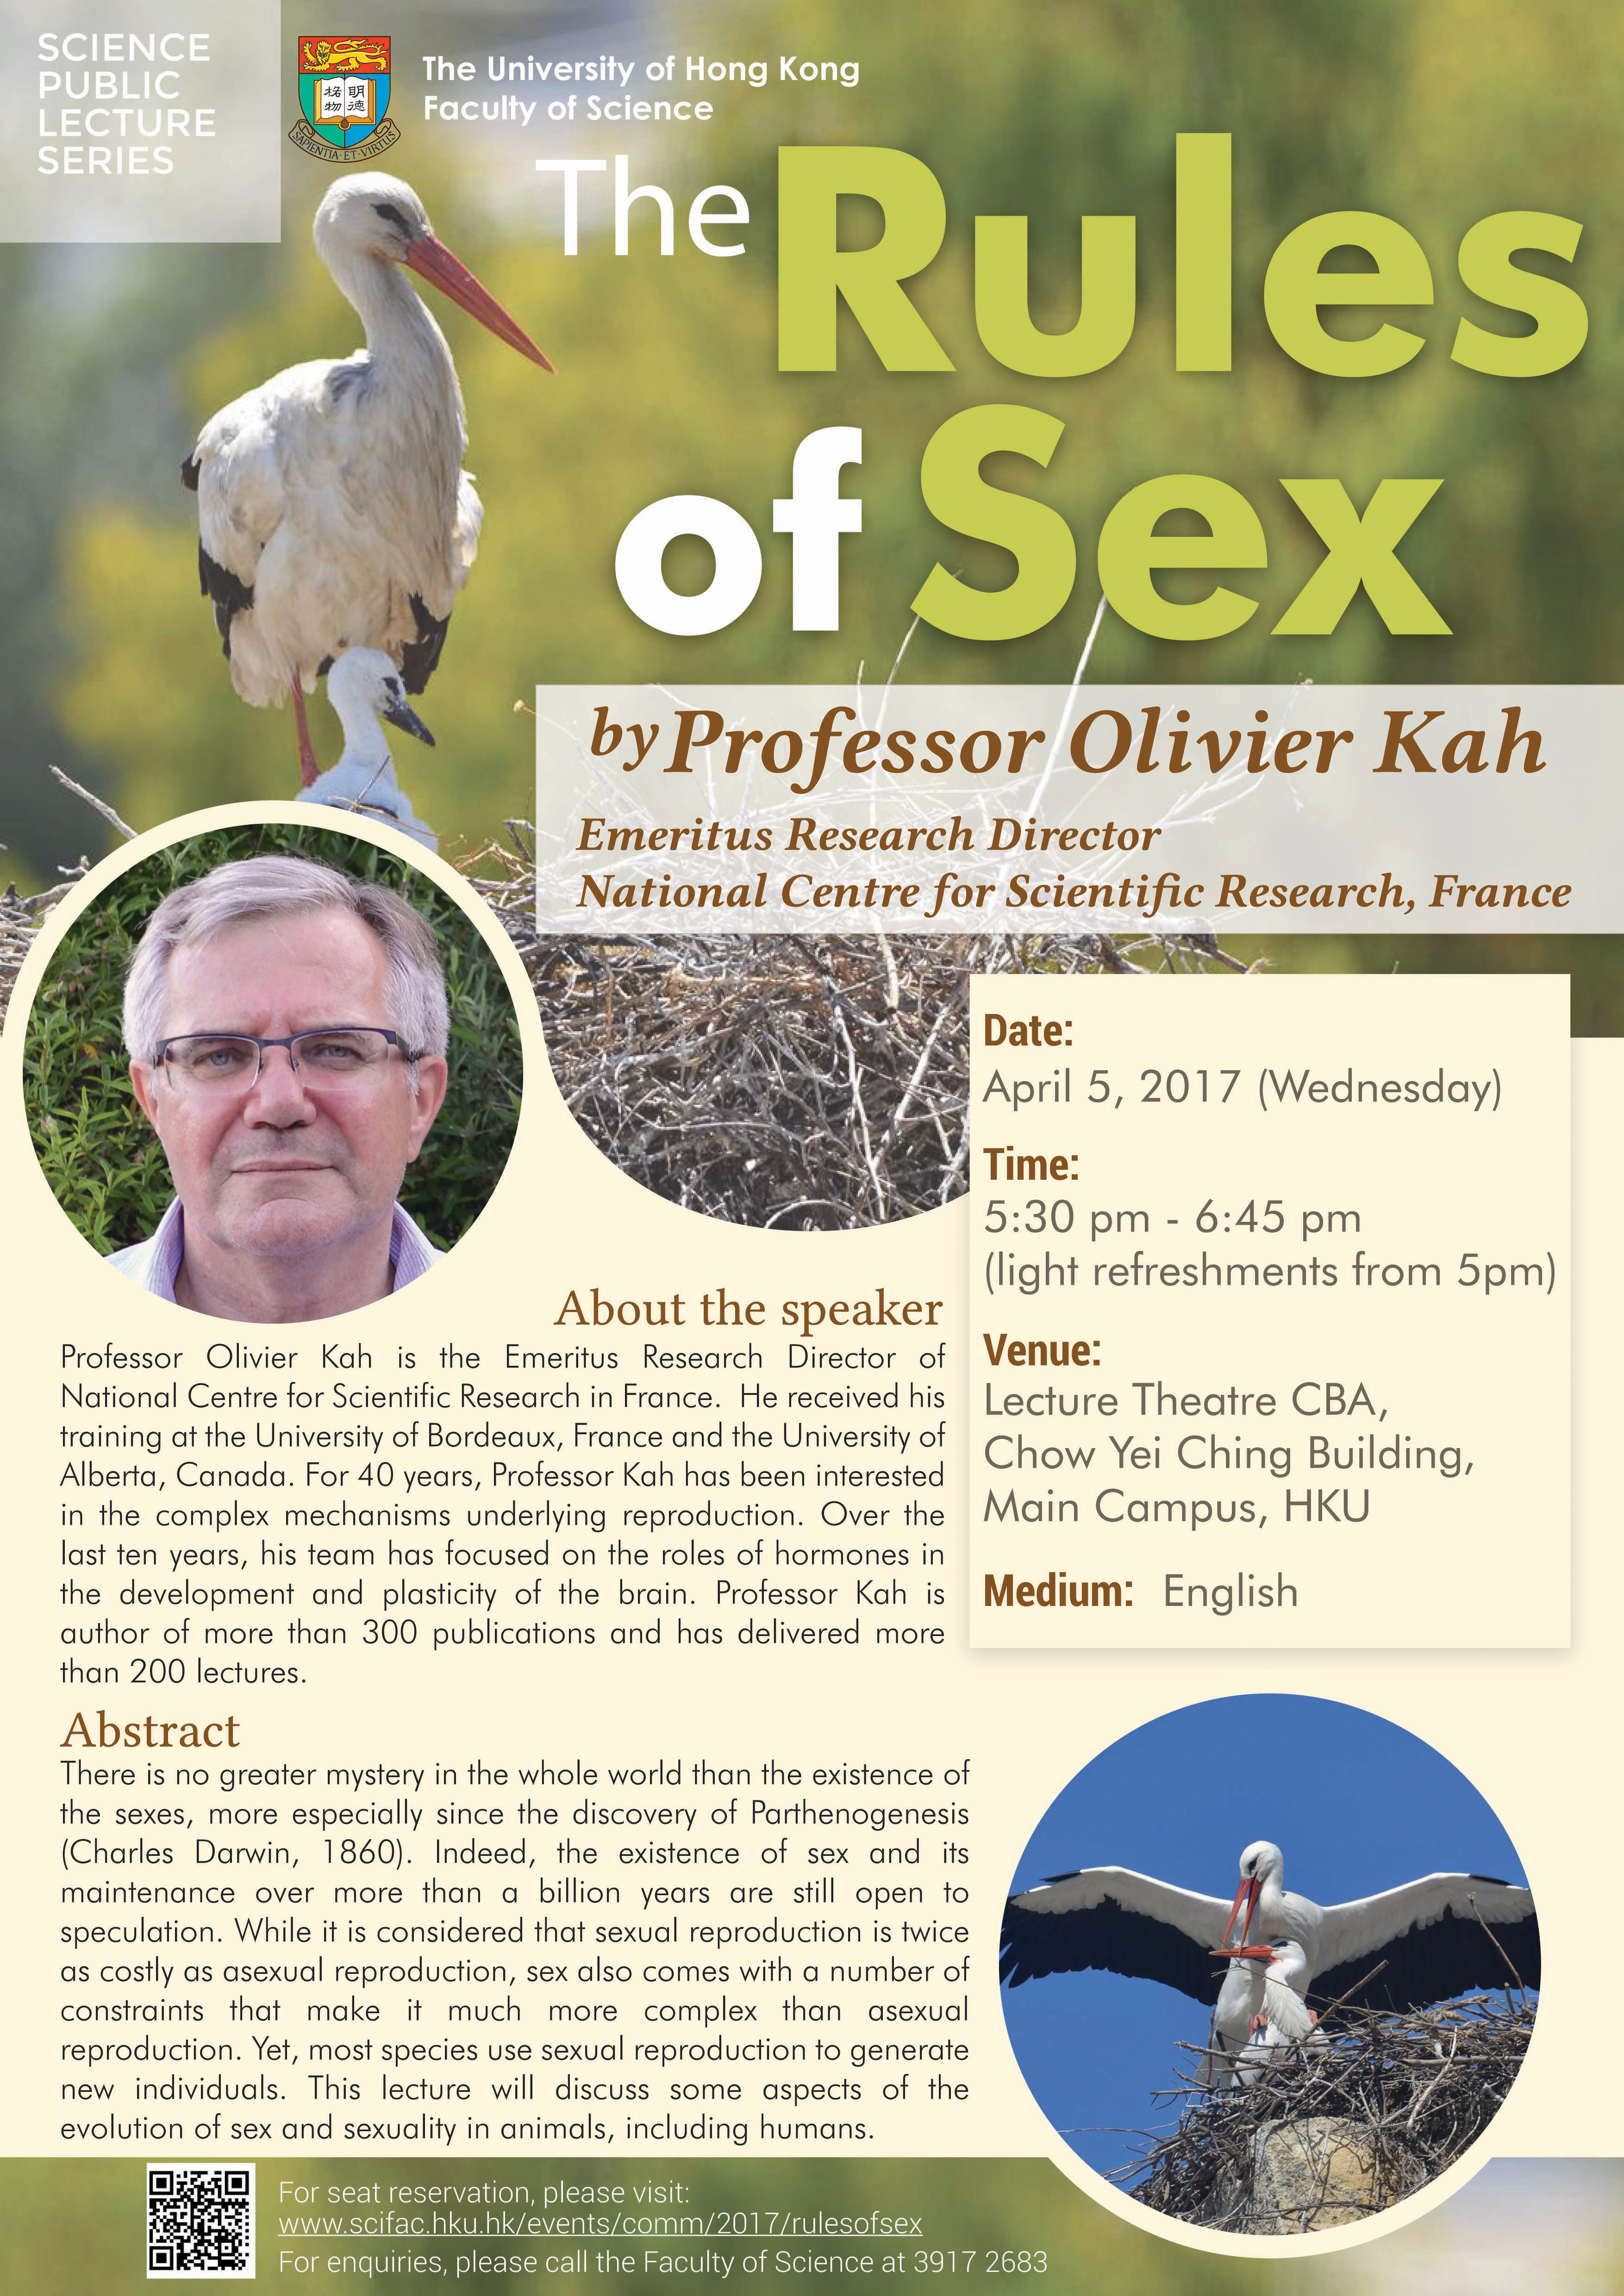 Public Lecture: The Rules of Sex